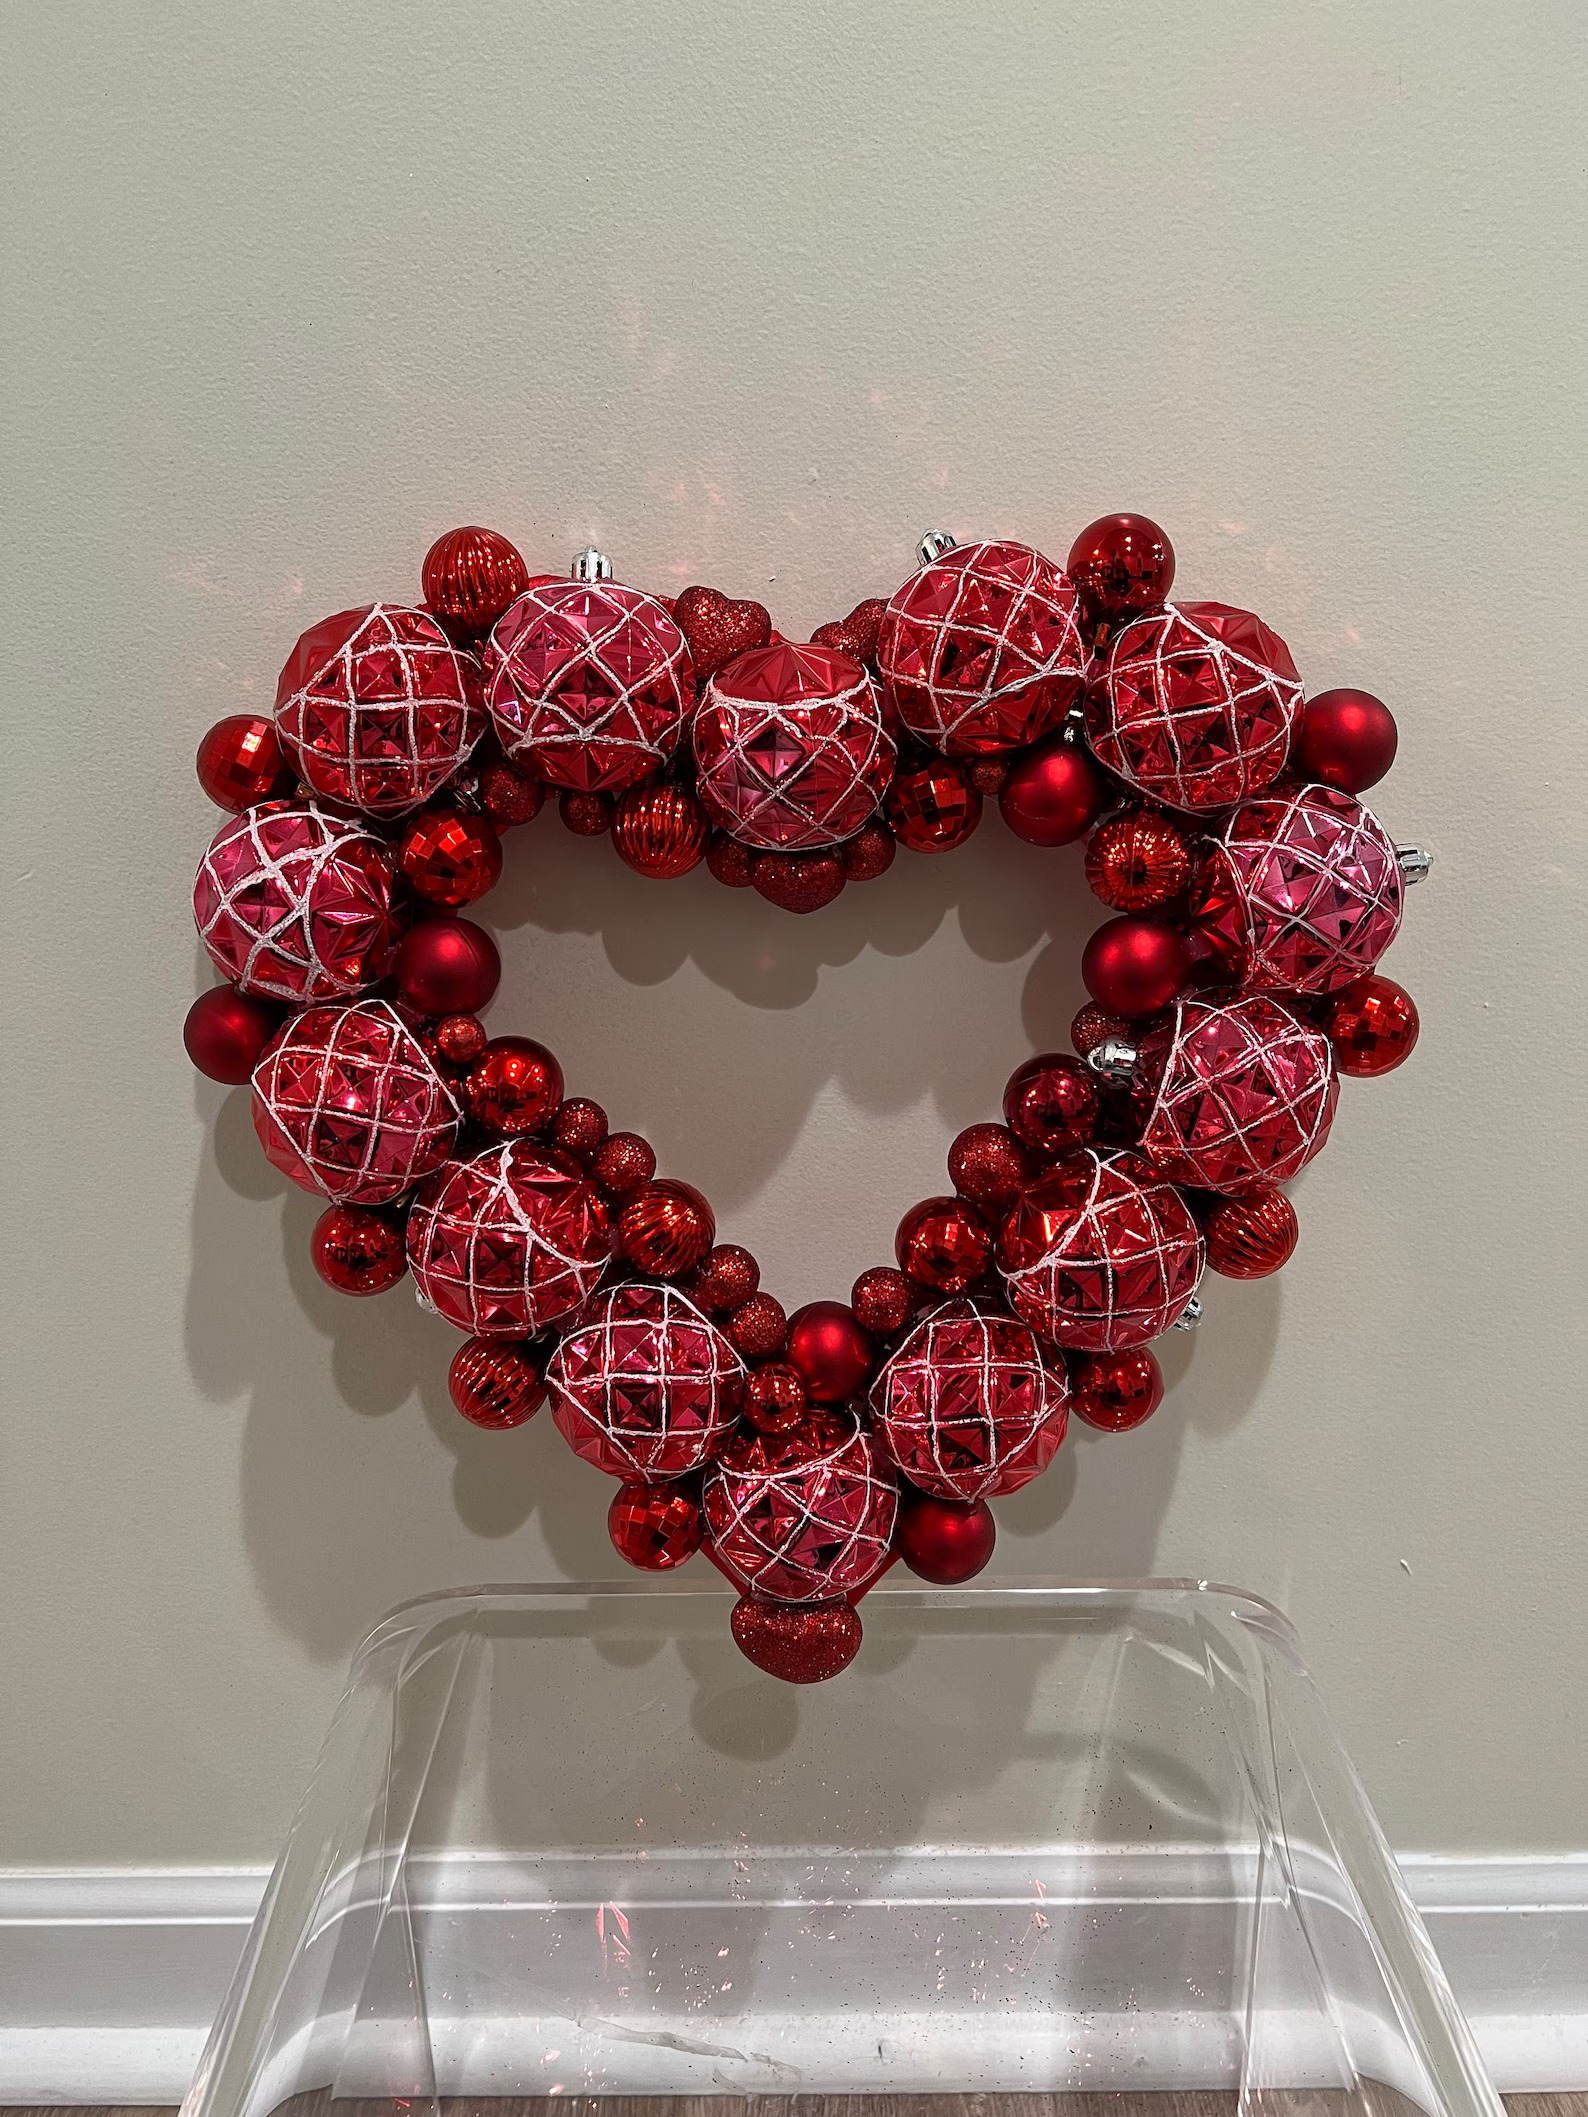 16 Valentine's Day Wreath Designs To Decorate Your Home With Love